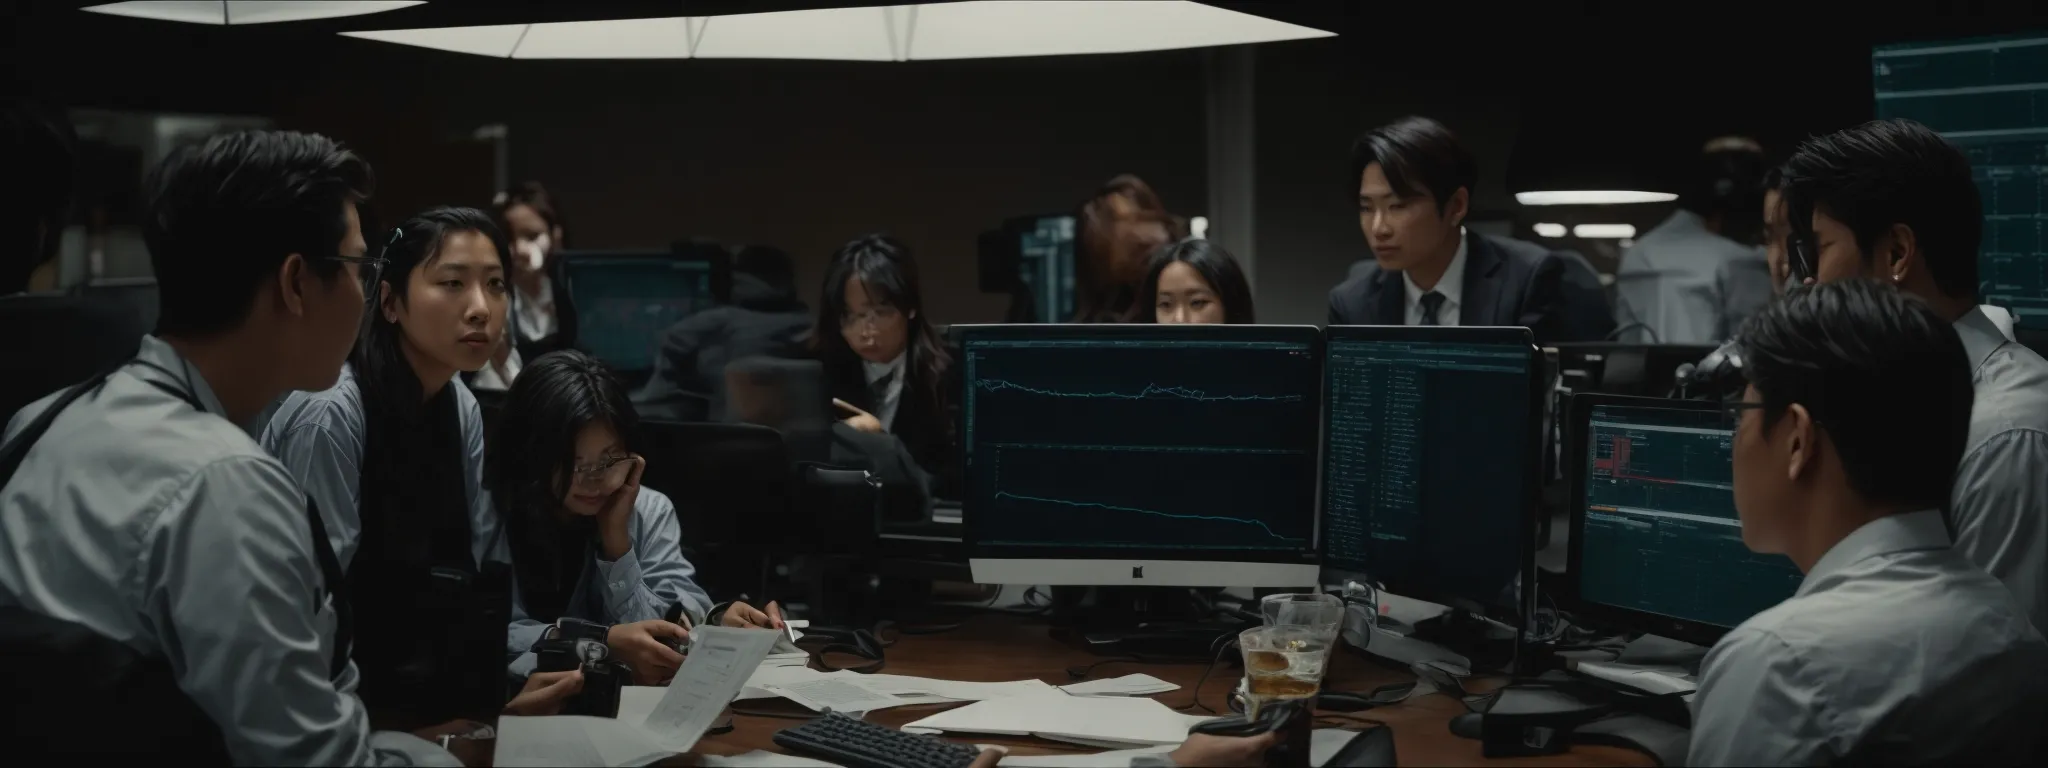 a team of professionals gathered around a computer, analyzing data charts while discussing strategies.